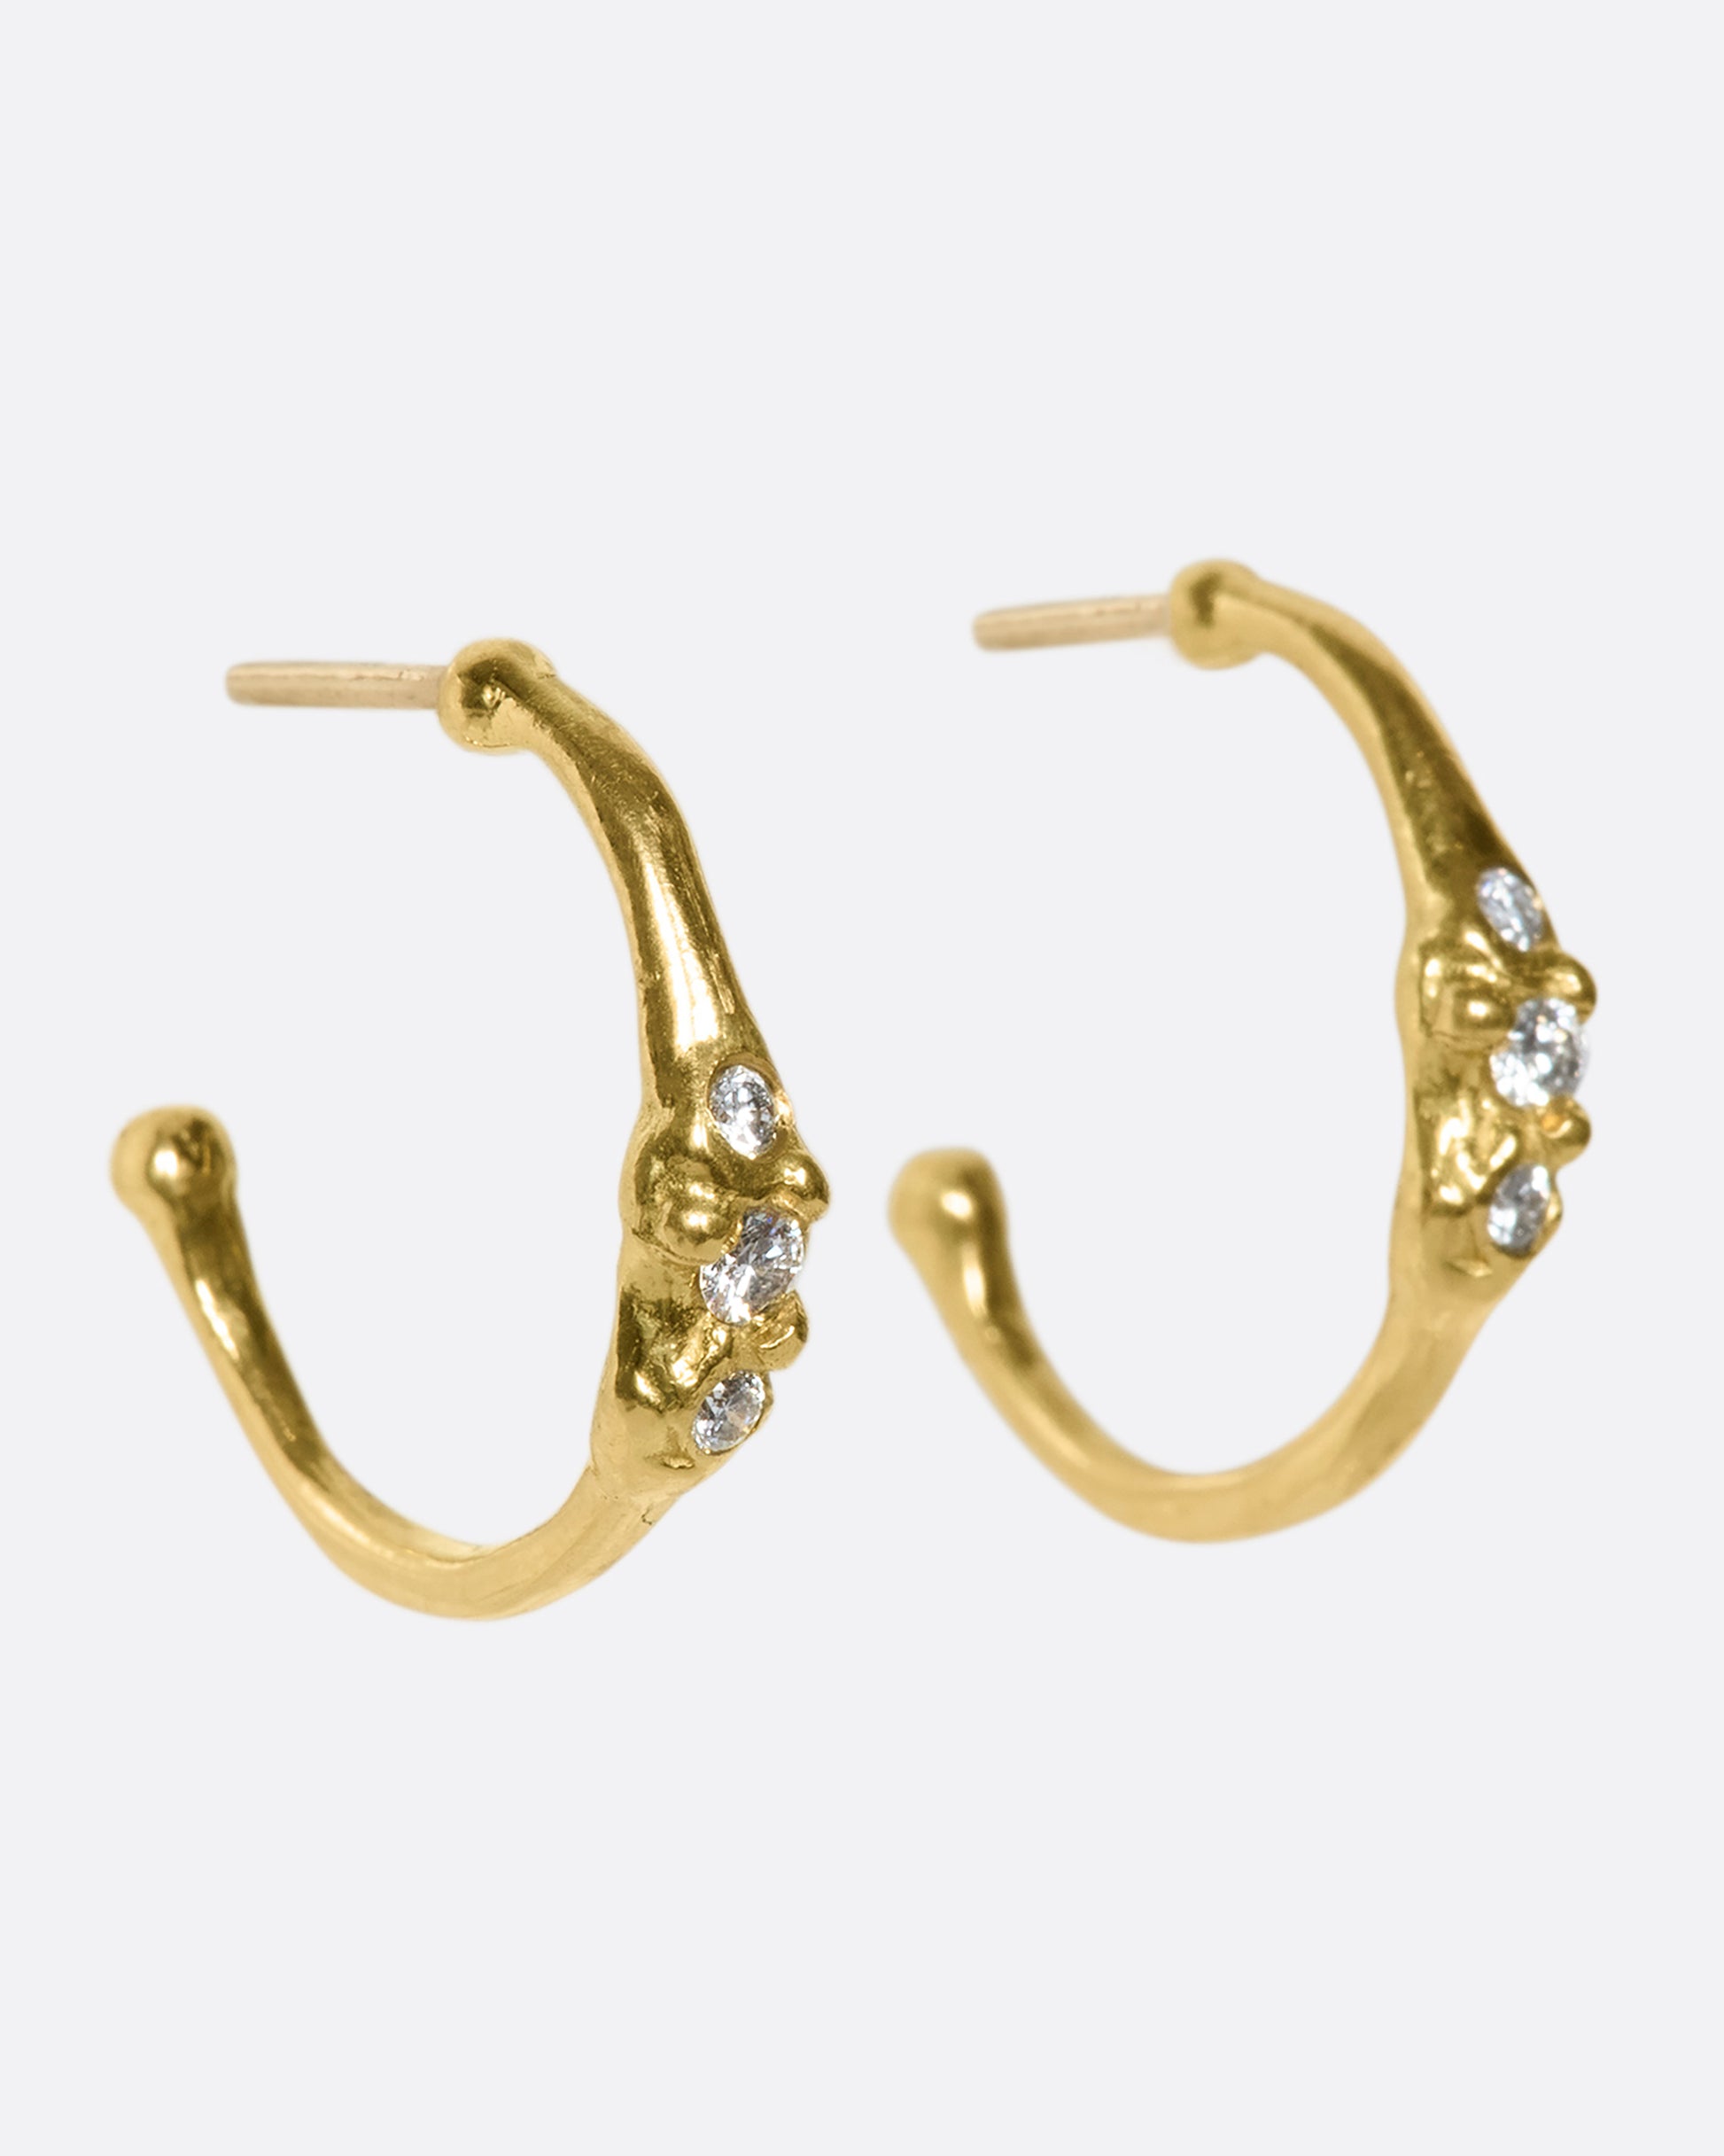 18k gold stud hoops with three diamonds set across the front